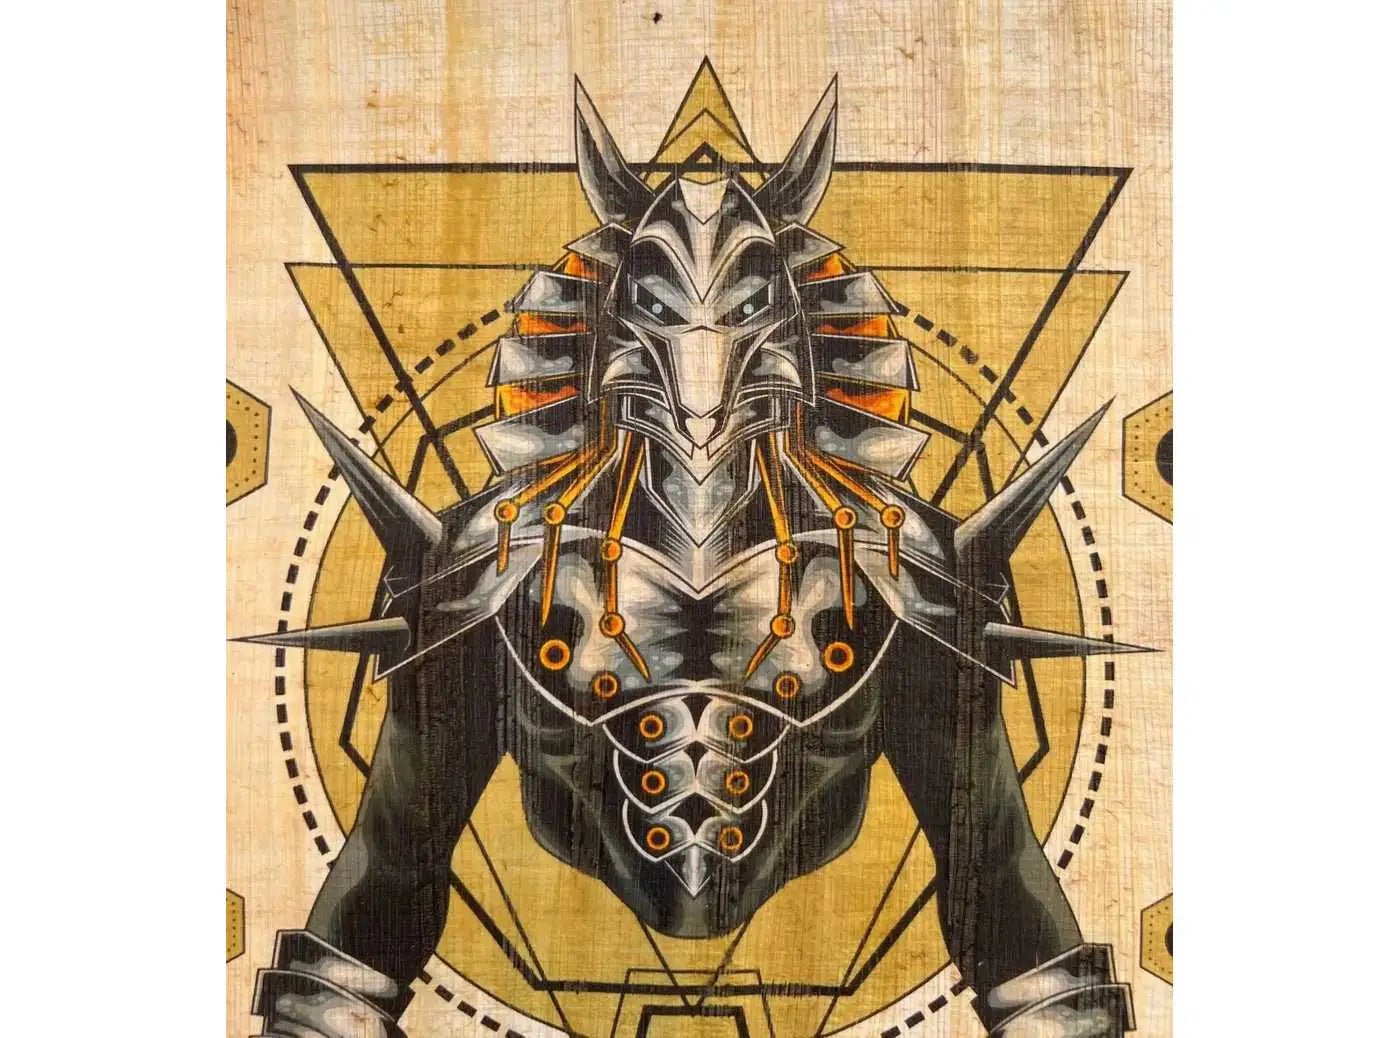 Mighty Anubis Sacred Geometry Printing on Egyptian Authentic Vintage Papyrus Paper - Gift for Anubis Lovers